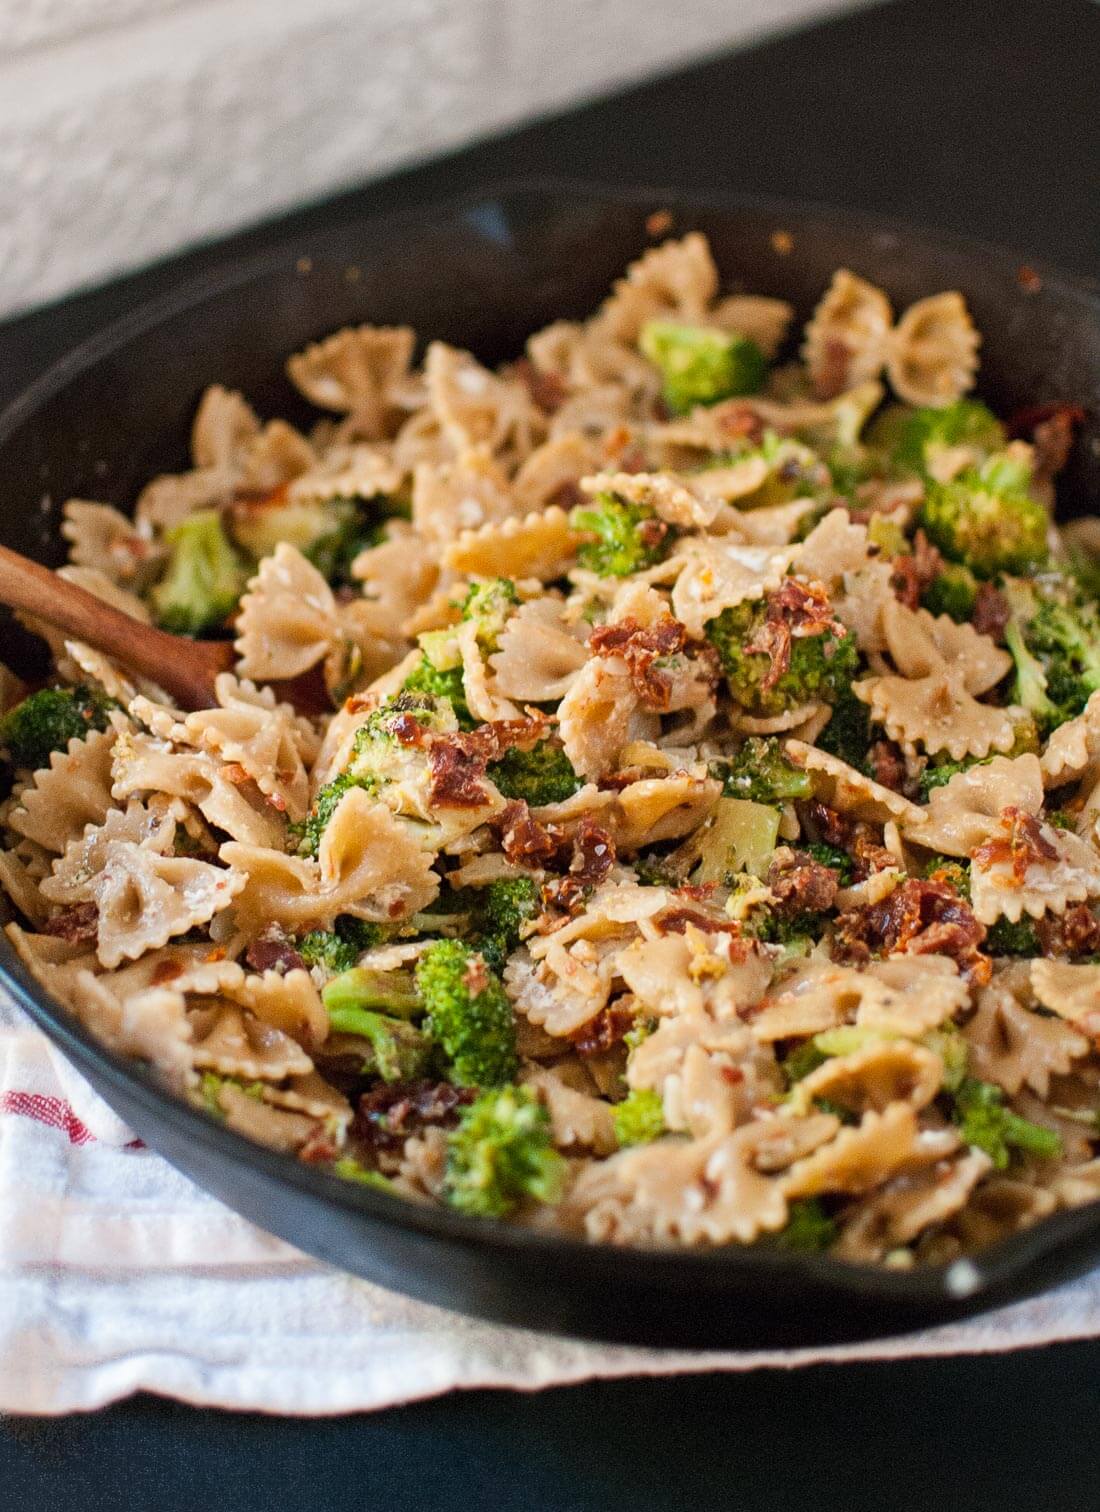 Spicy sun-dried tomato and broccoli pasta from cookieandkate.com